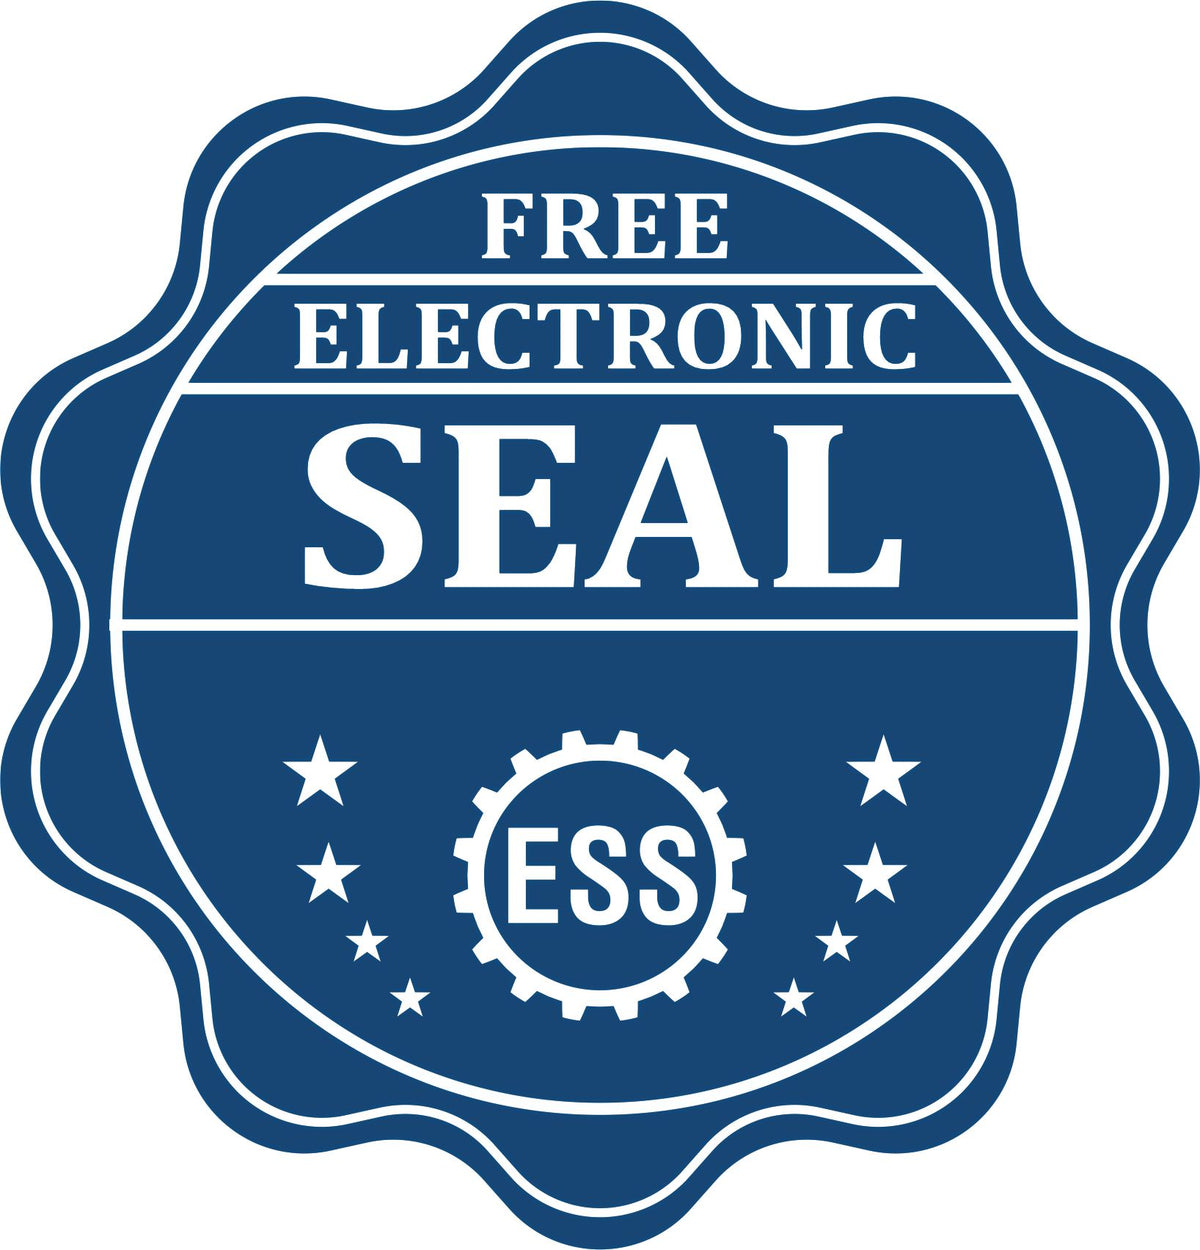 A badge showing a free electronic seal for the State of Florida Extended Long Reach Geologist Seal with stars and the ESS gear on the emblem.